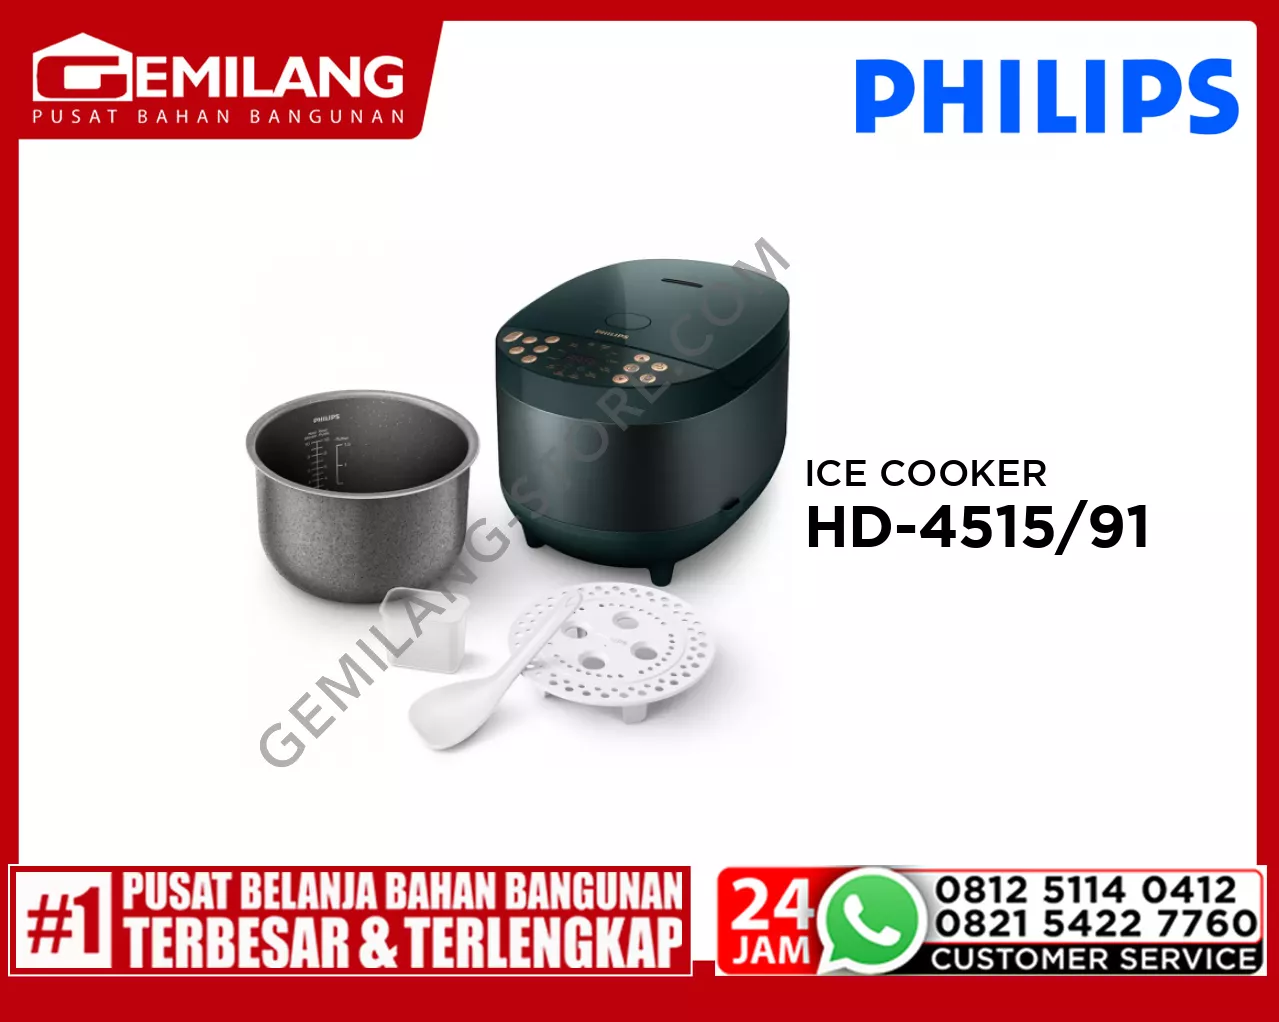 PHILIPS RICE COOKER HD-4515/91